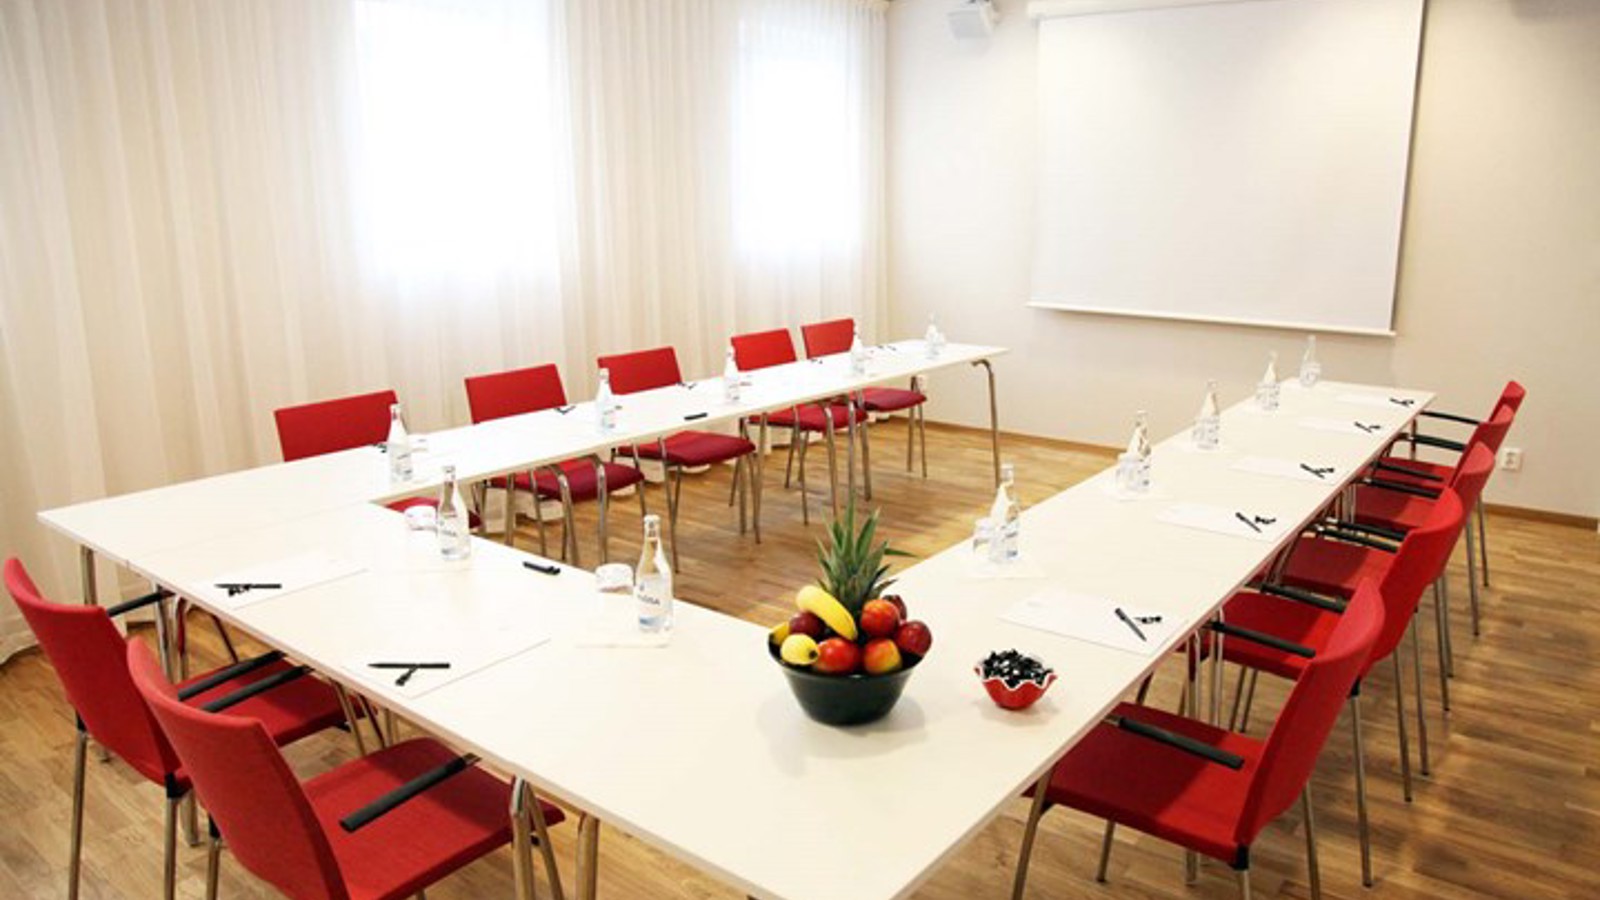 Conference room with u-shaped seating, white walls, white table and red chairs